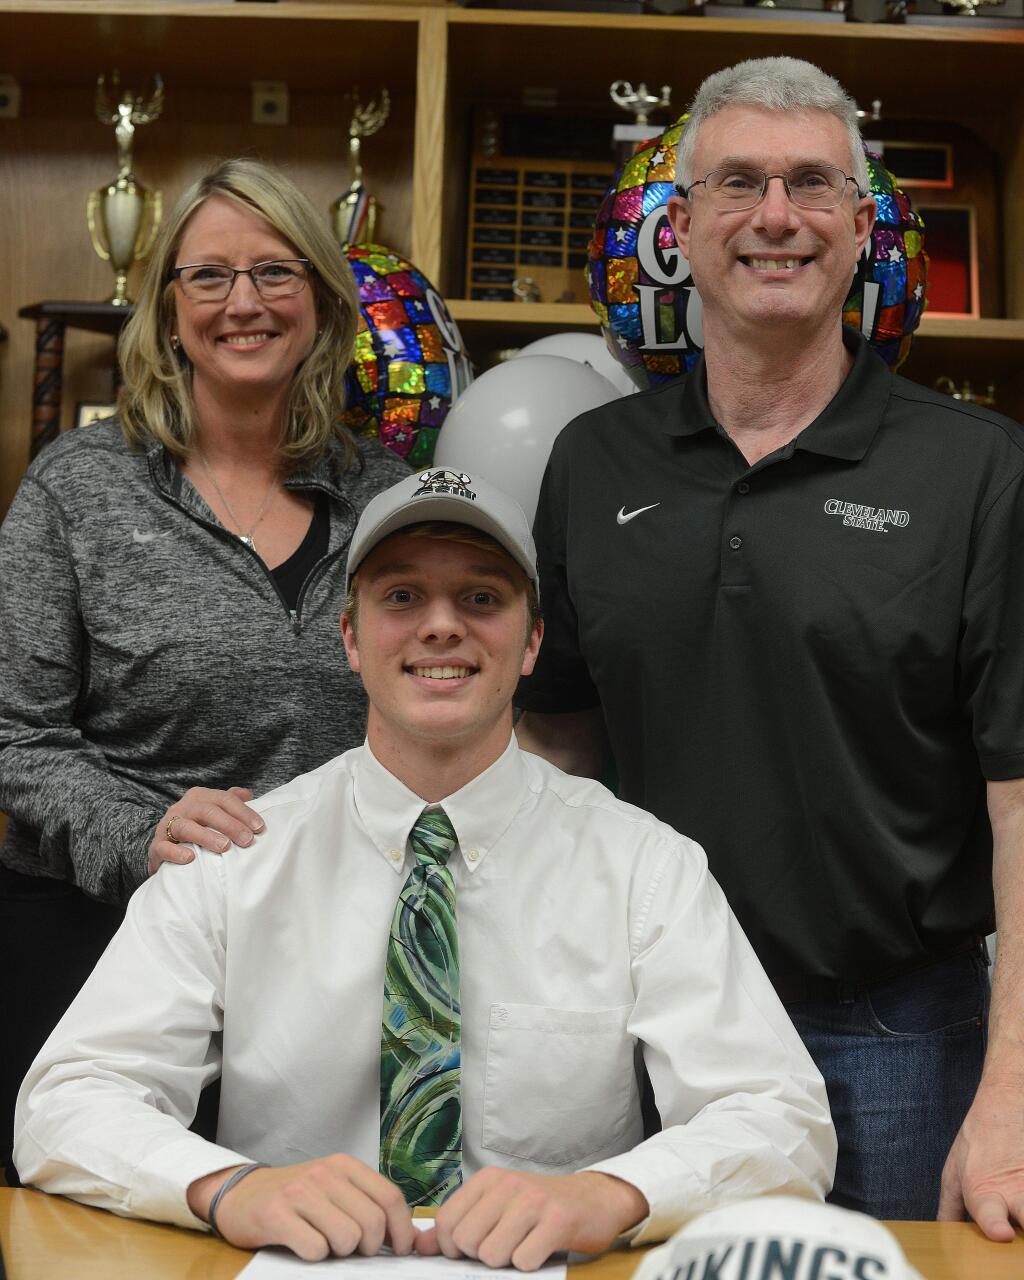 SUMNER FOWLER/FOR THE ARGUS-COURIERIan McKissick, with mother, Lisa, and father, Ronald, looking on, signs to play lacrosse at Cleveland State University.